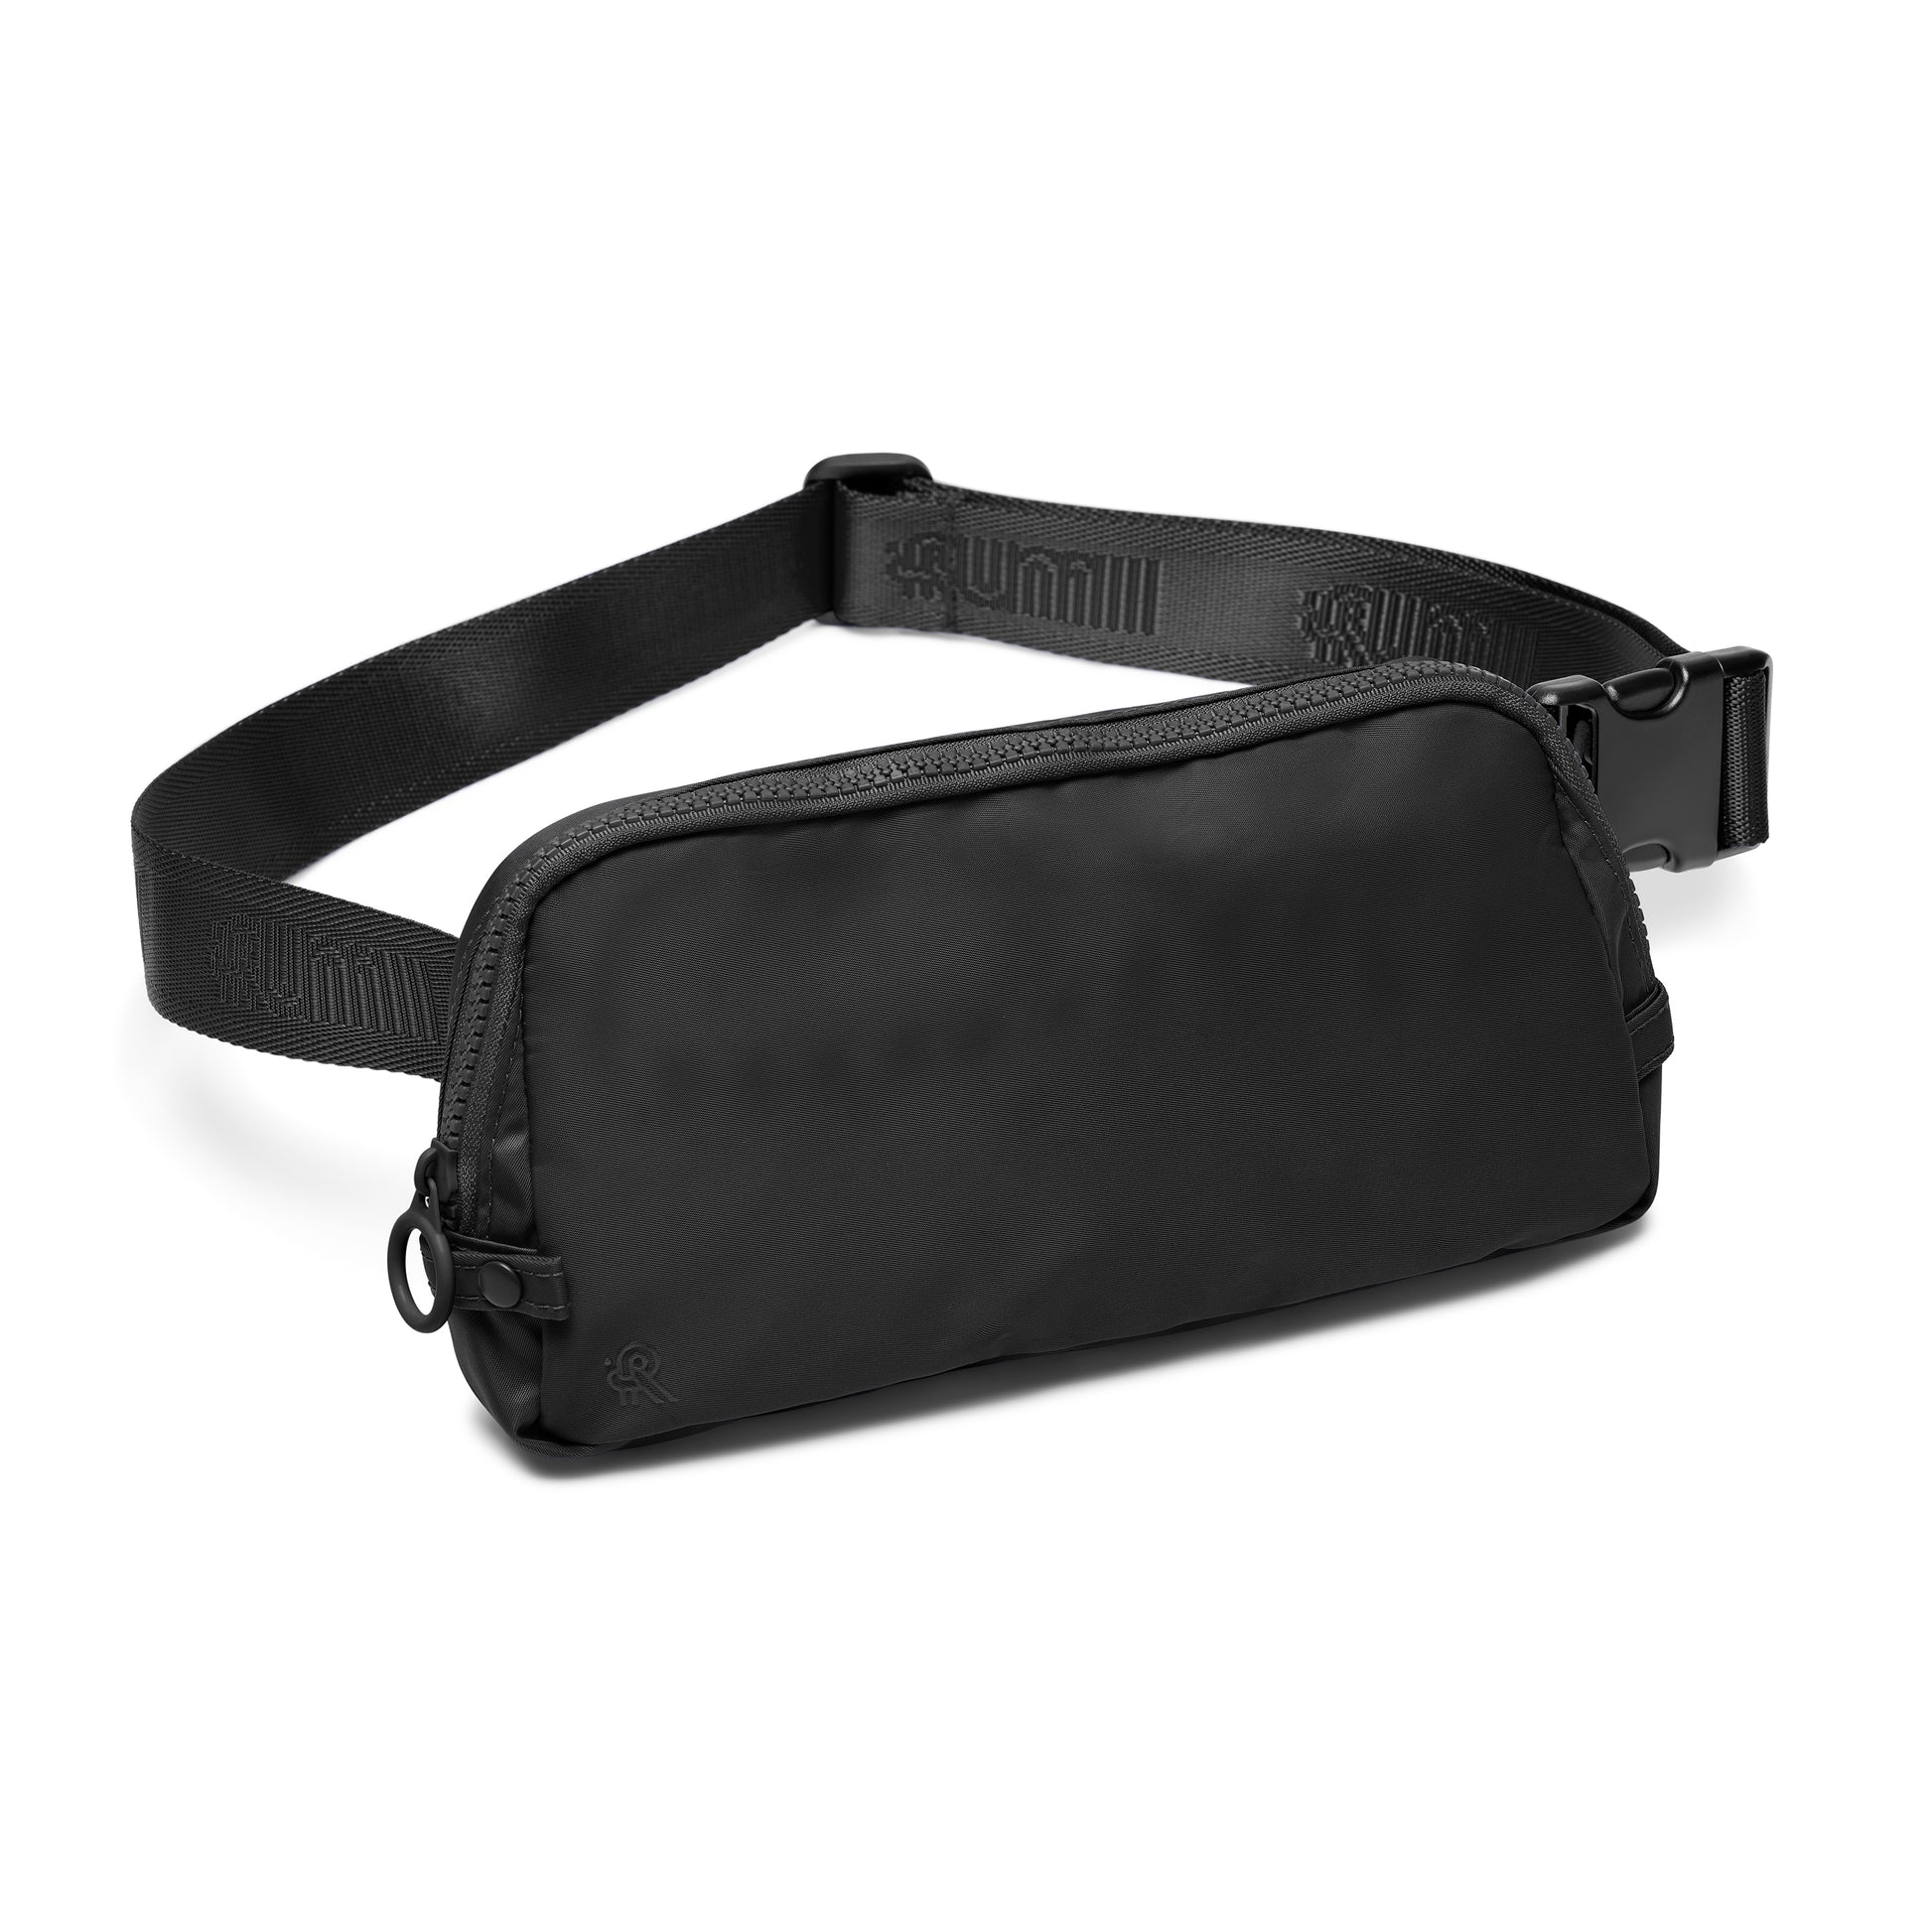 Black bag for essential workers